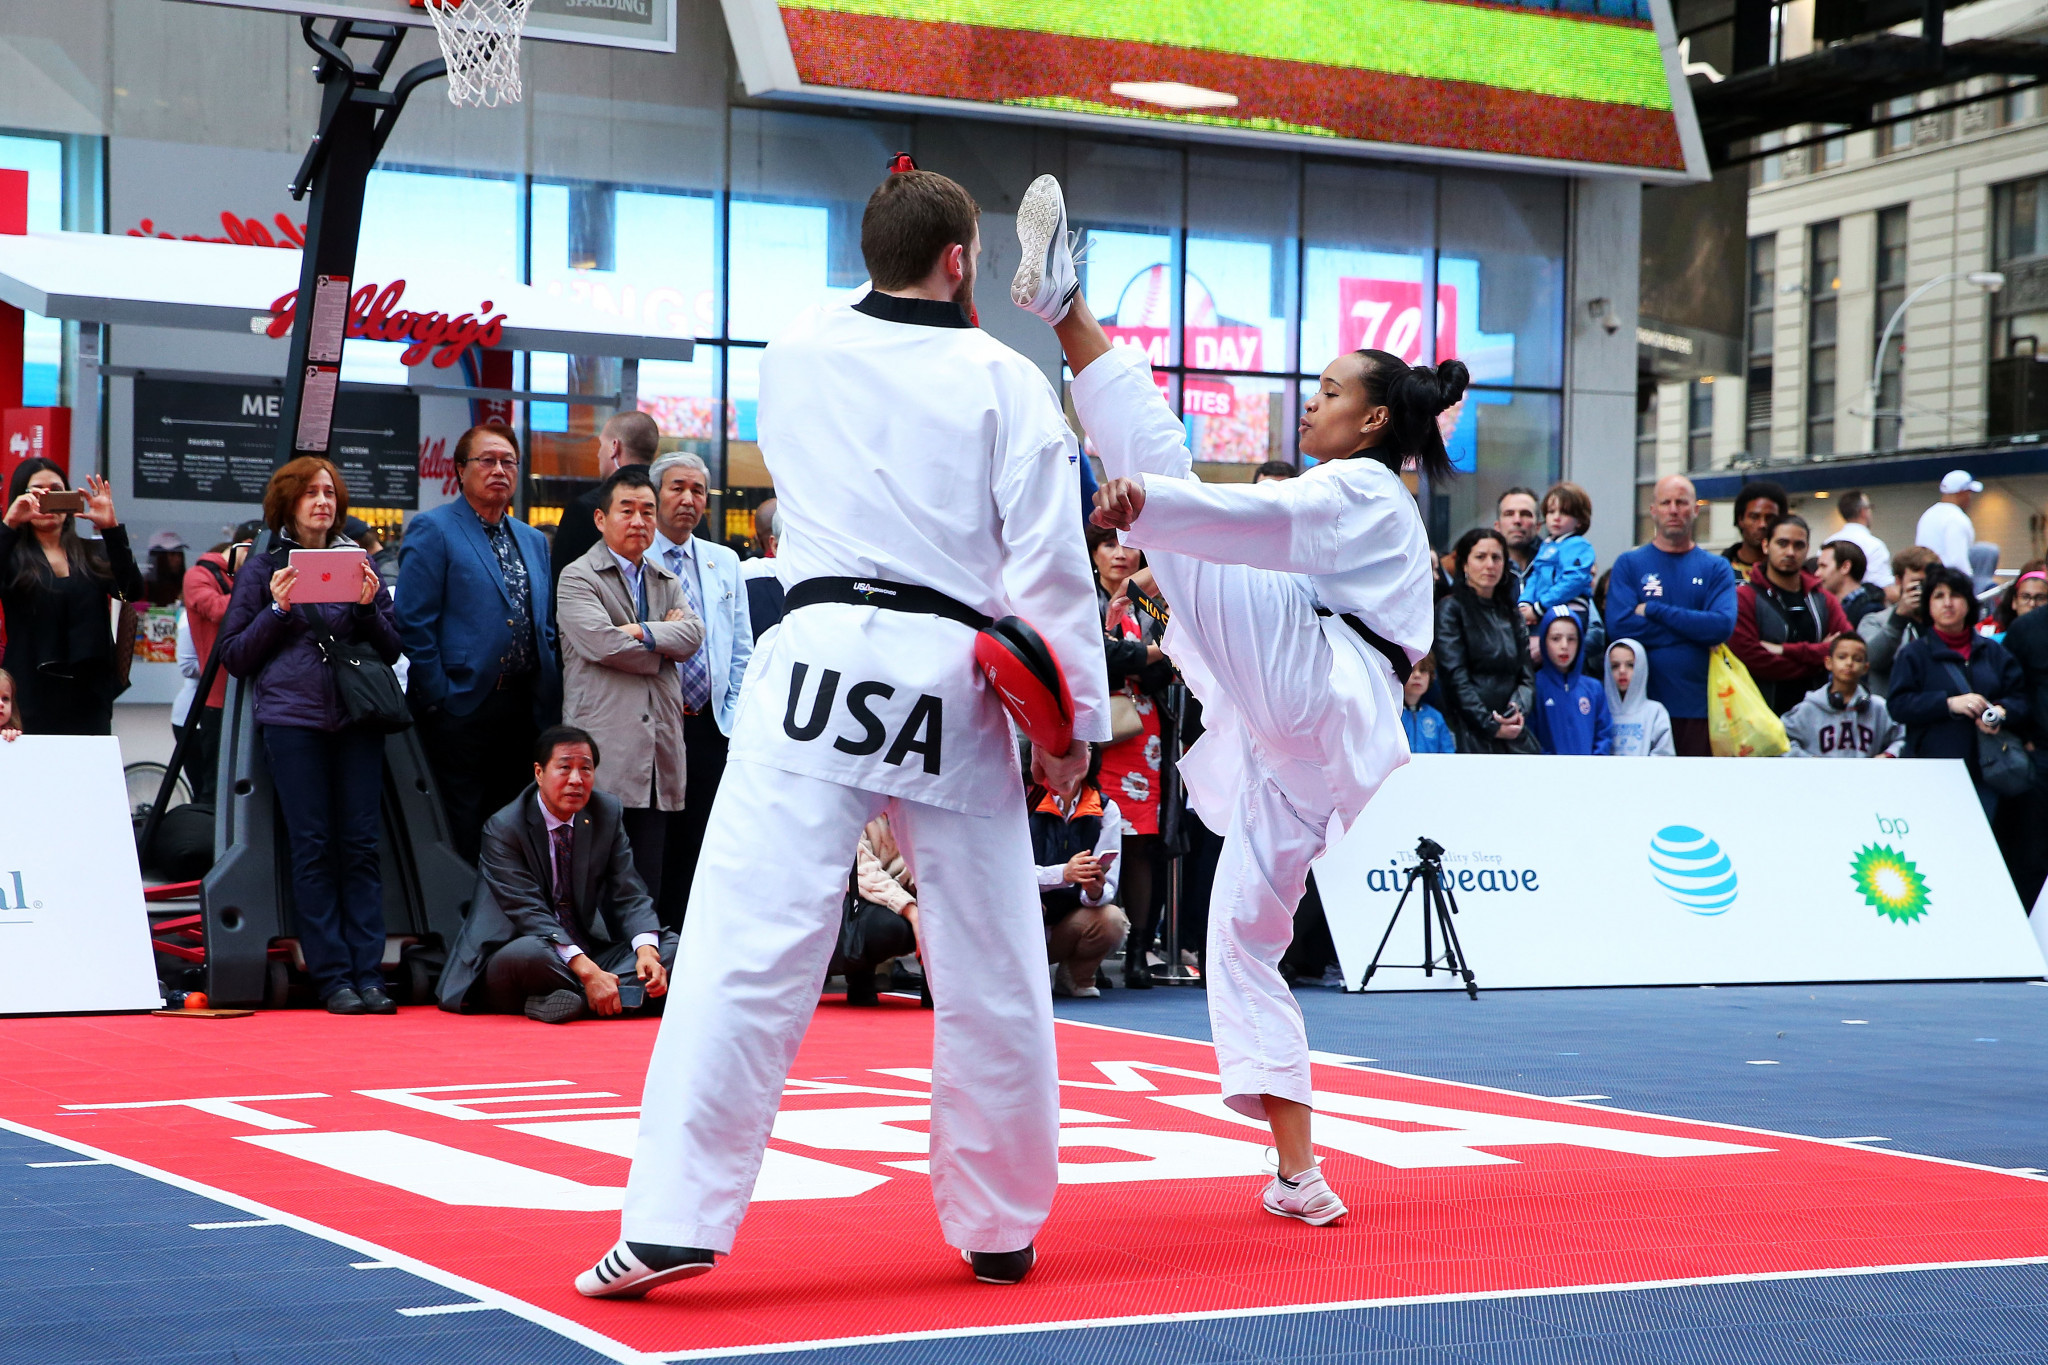 USA Taekwondo to launch Athlete Academy as part of Los Angeles 2028 plans